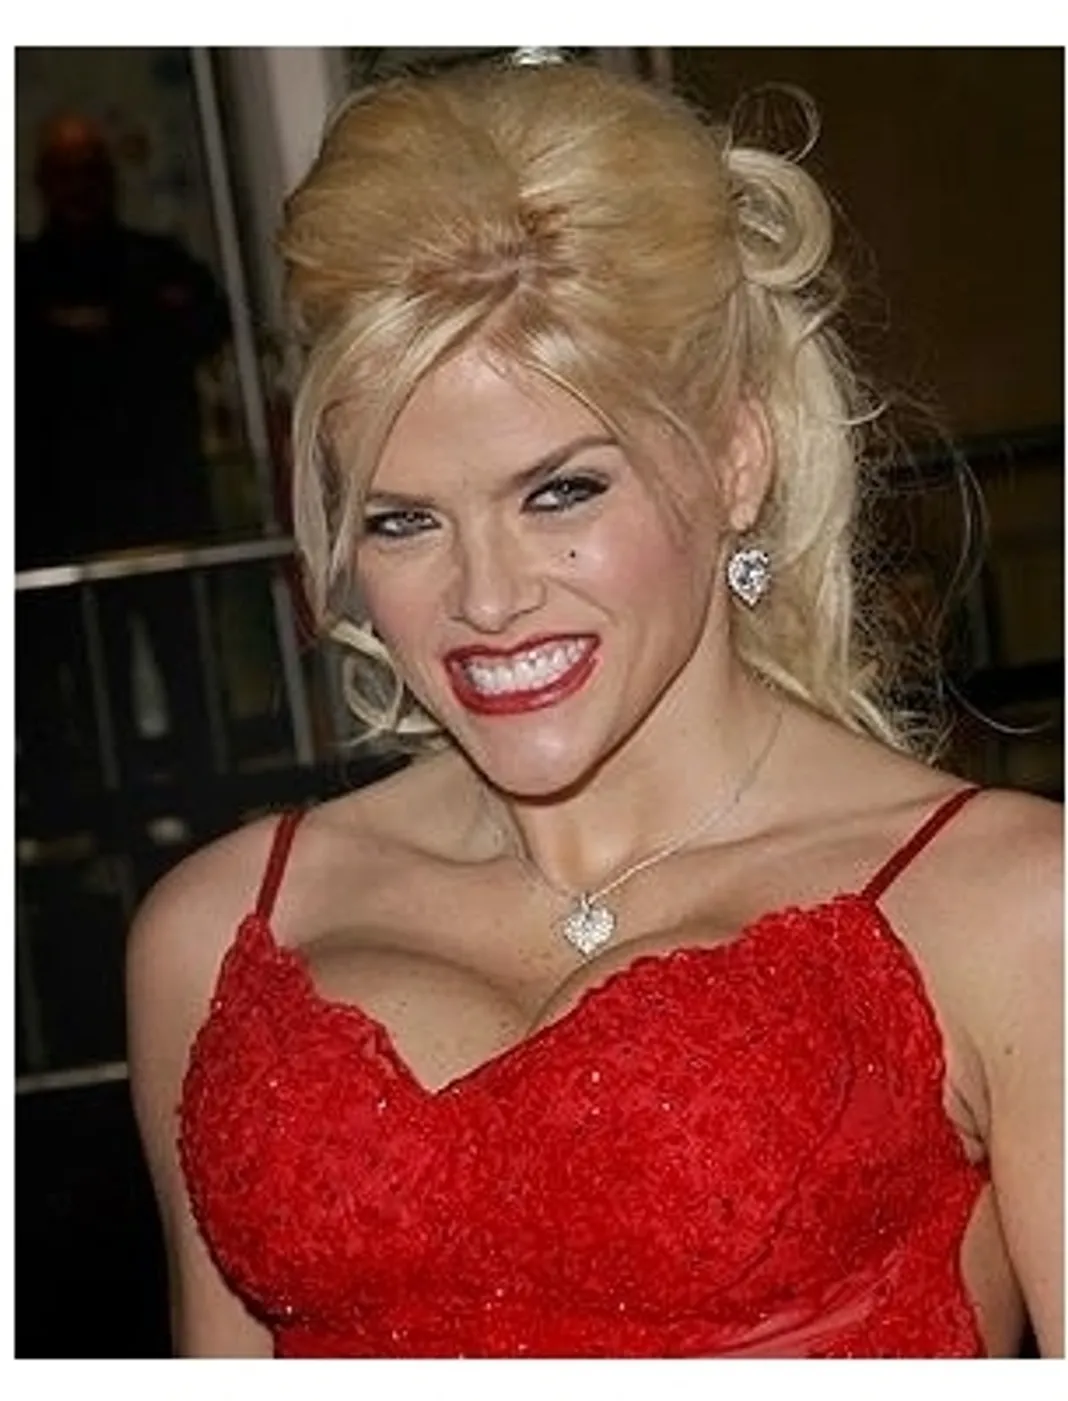 claire menzies recommends Anna Nicole Smith Boobs